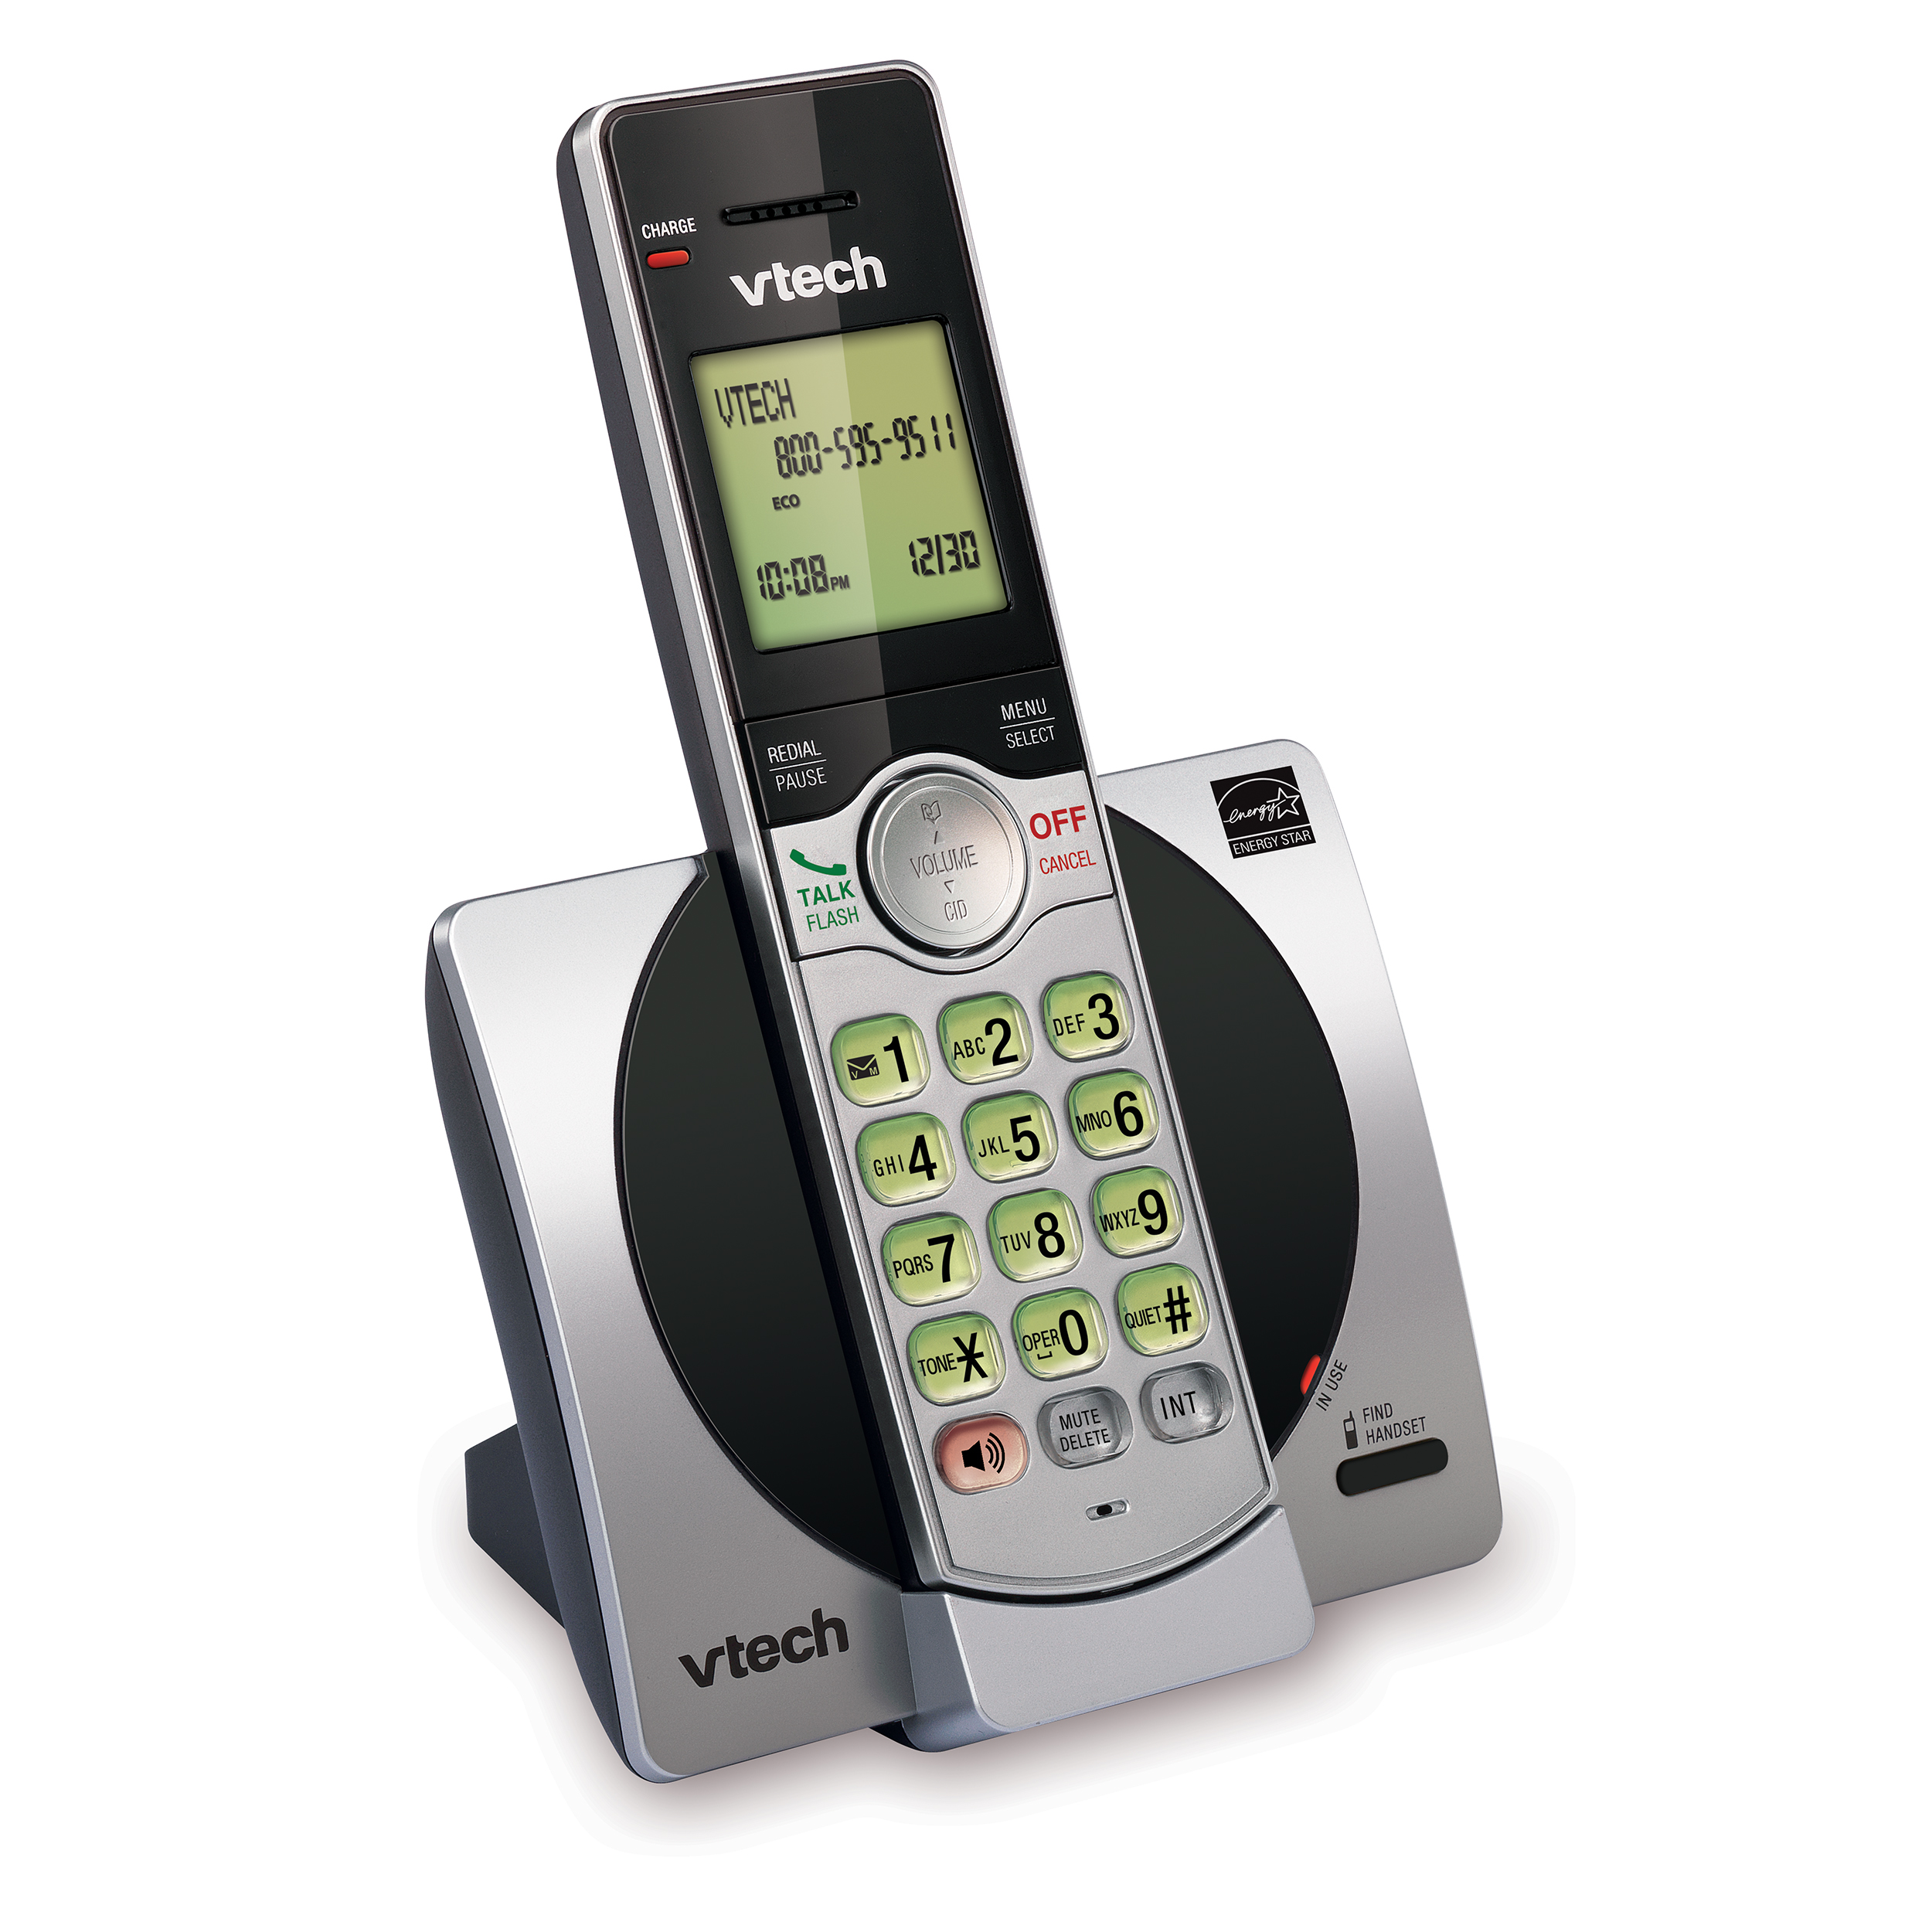 VTech DECT 6.0 Expandable Cordless Phone with Call Block, CS6919 (Silver & Black) - image 2 of 3